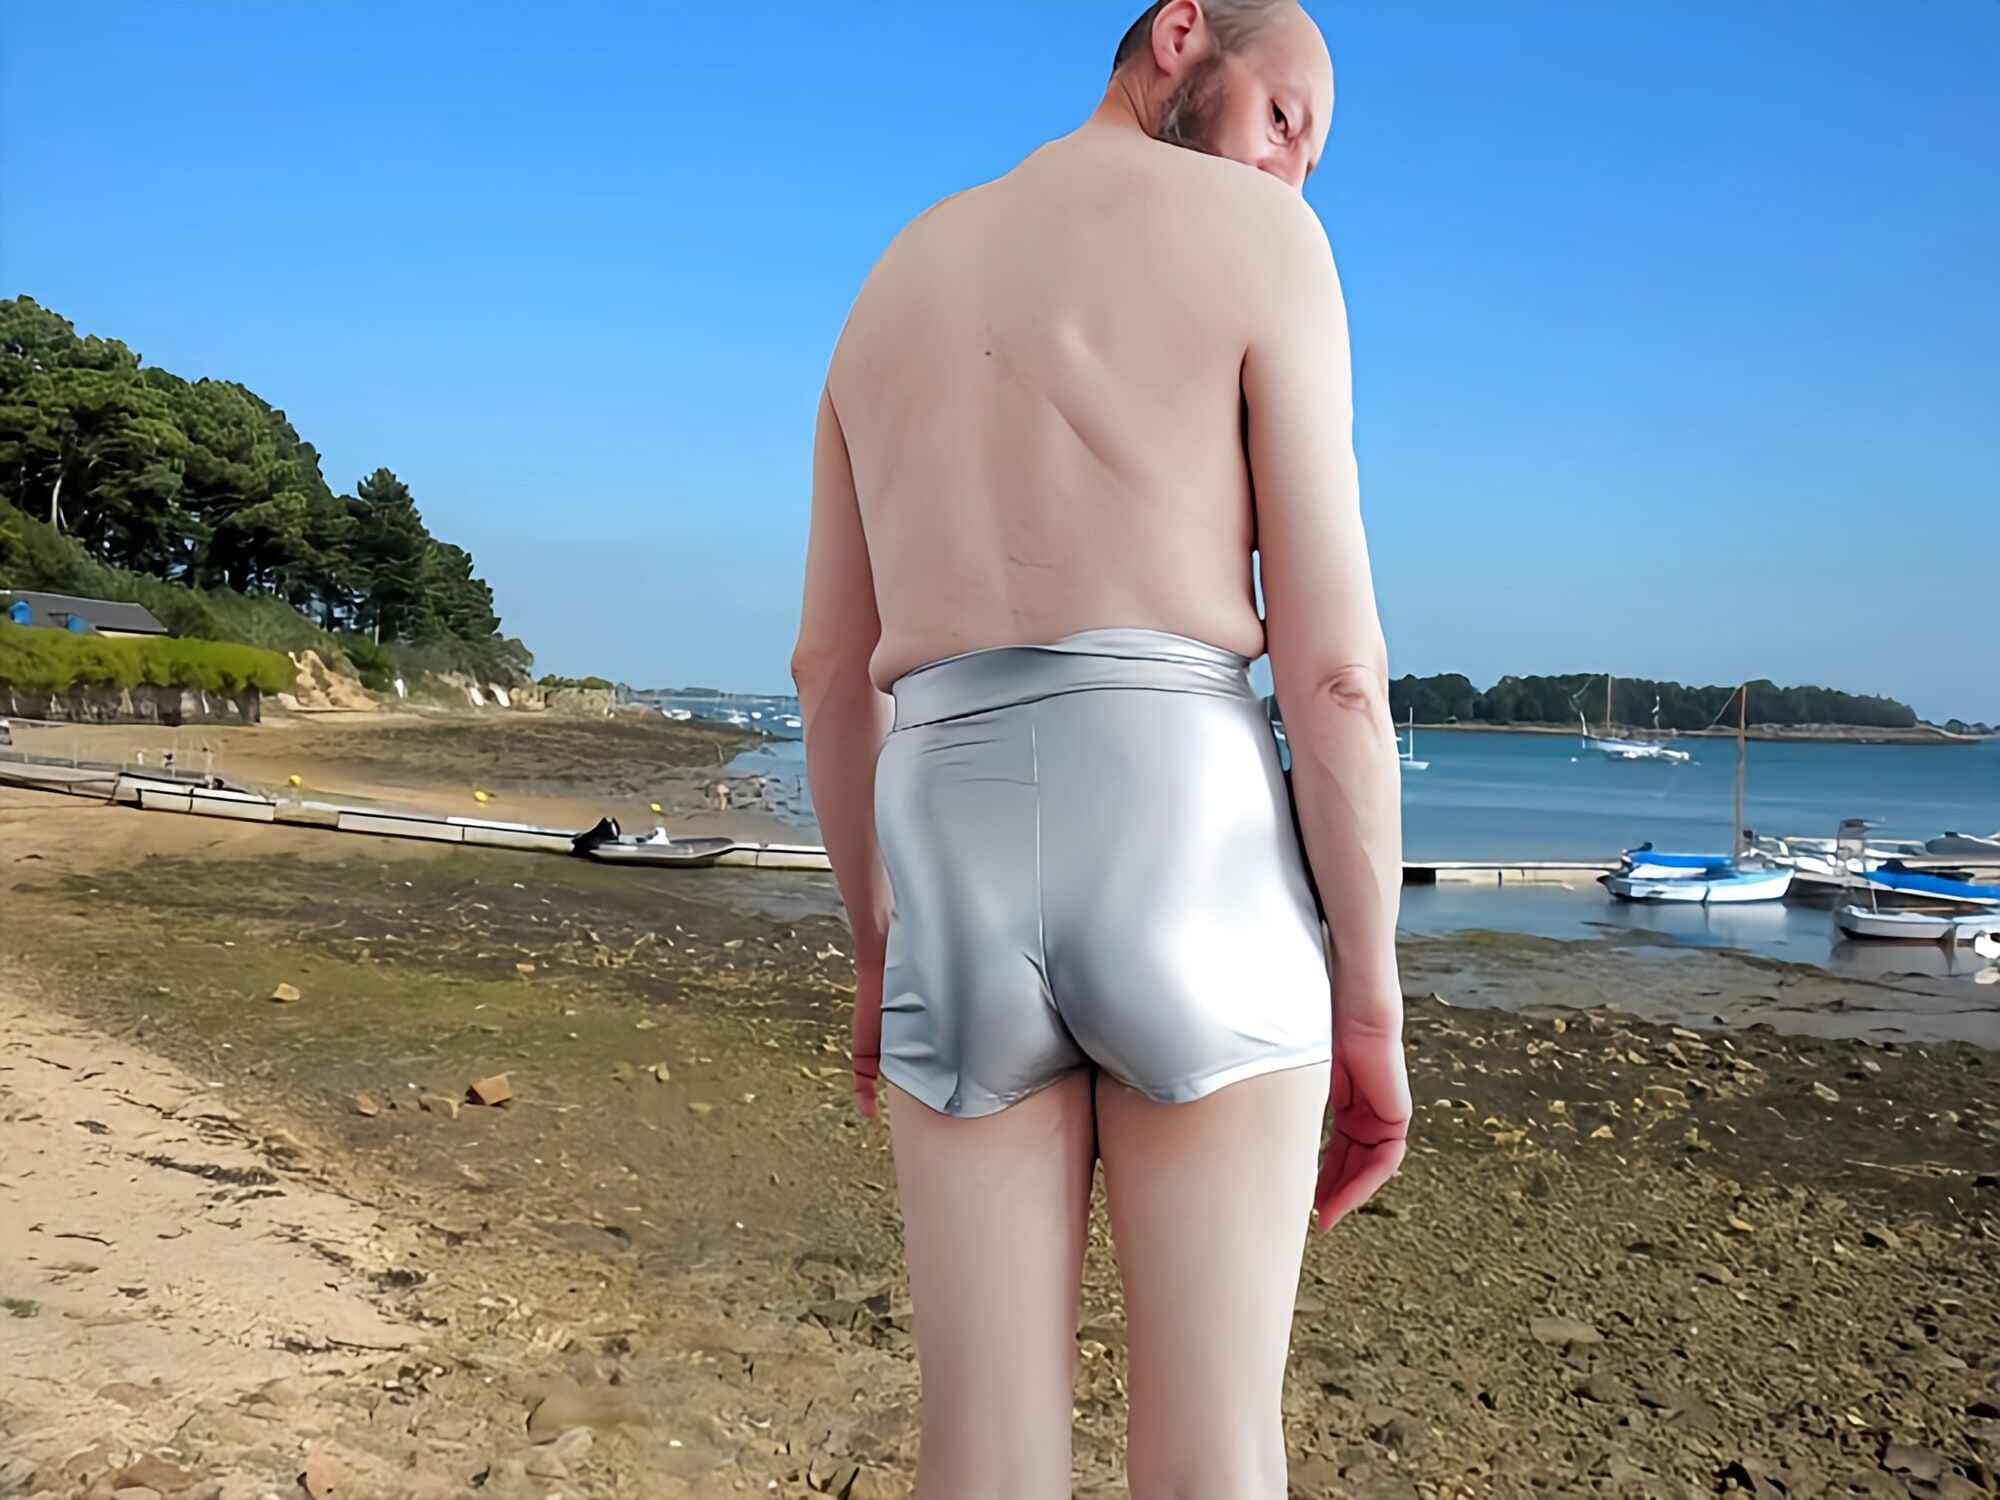 porcinus on vacation by the sea naturist beaches #5